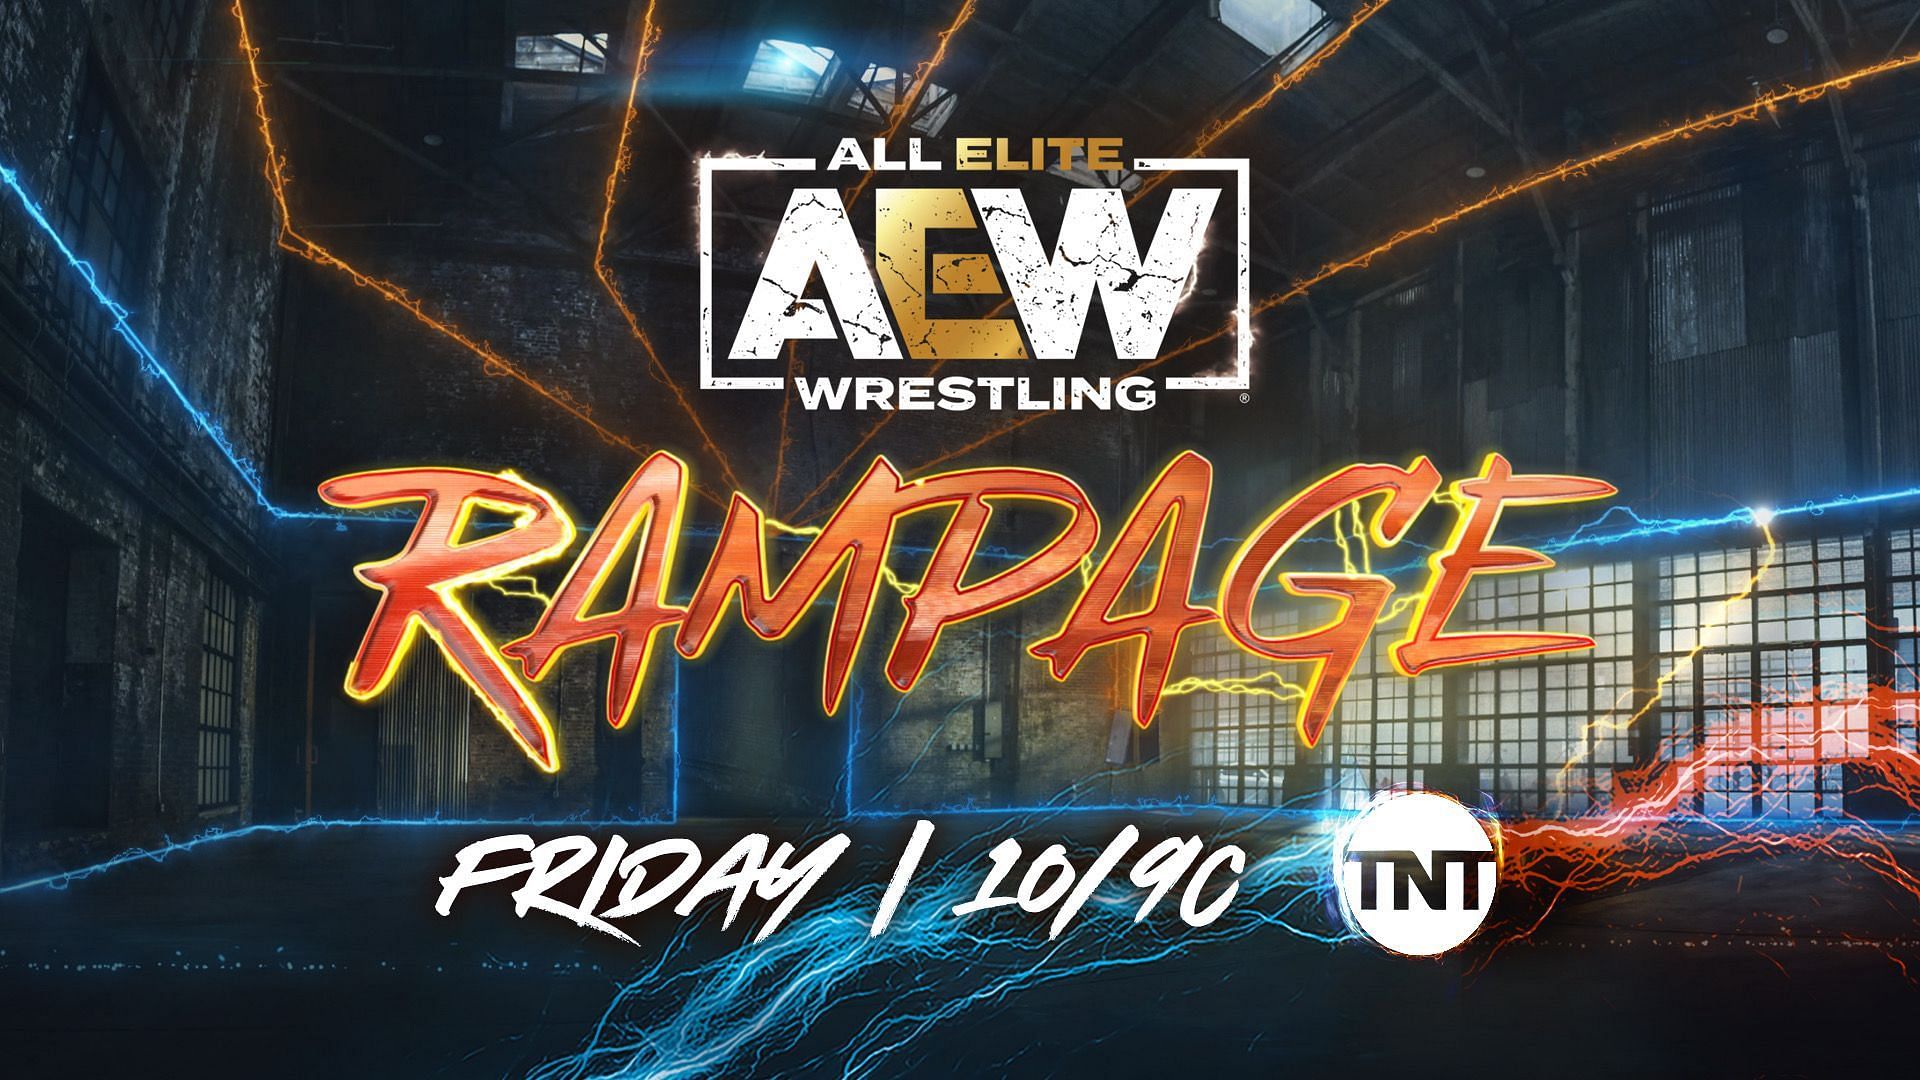 AEW Rampage airs on TNT every Friday night